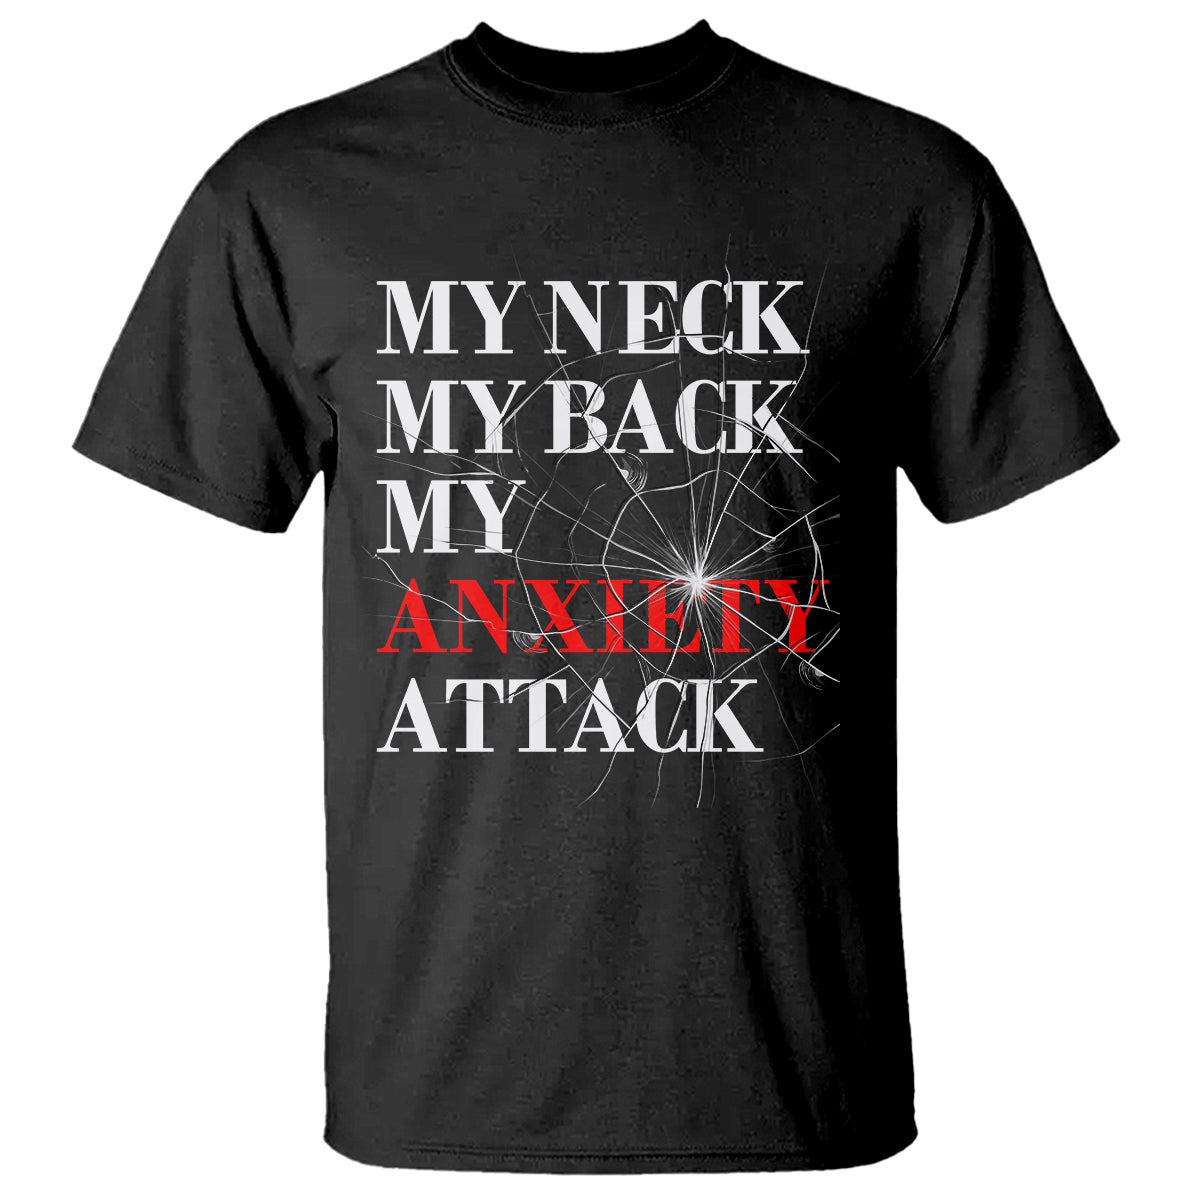 Mental Health Awareness T Shirt My Neck My Back My Anxiety Attack TS09 Black Printyourwear